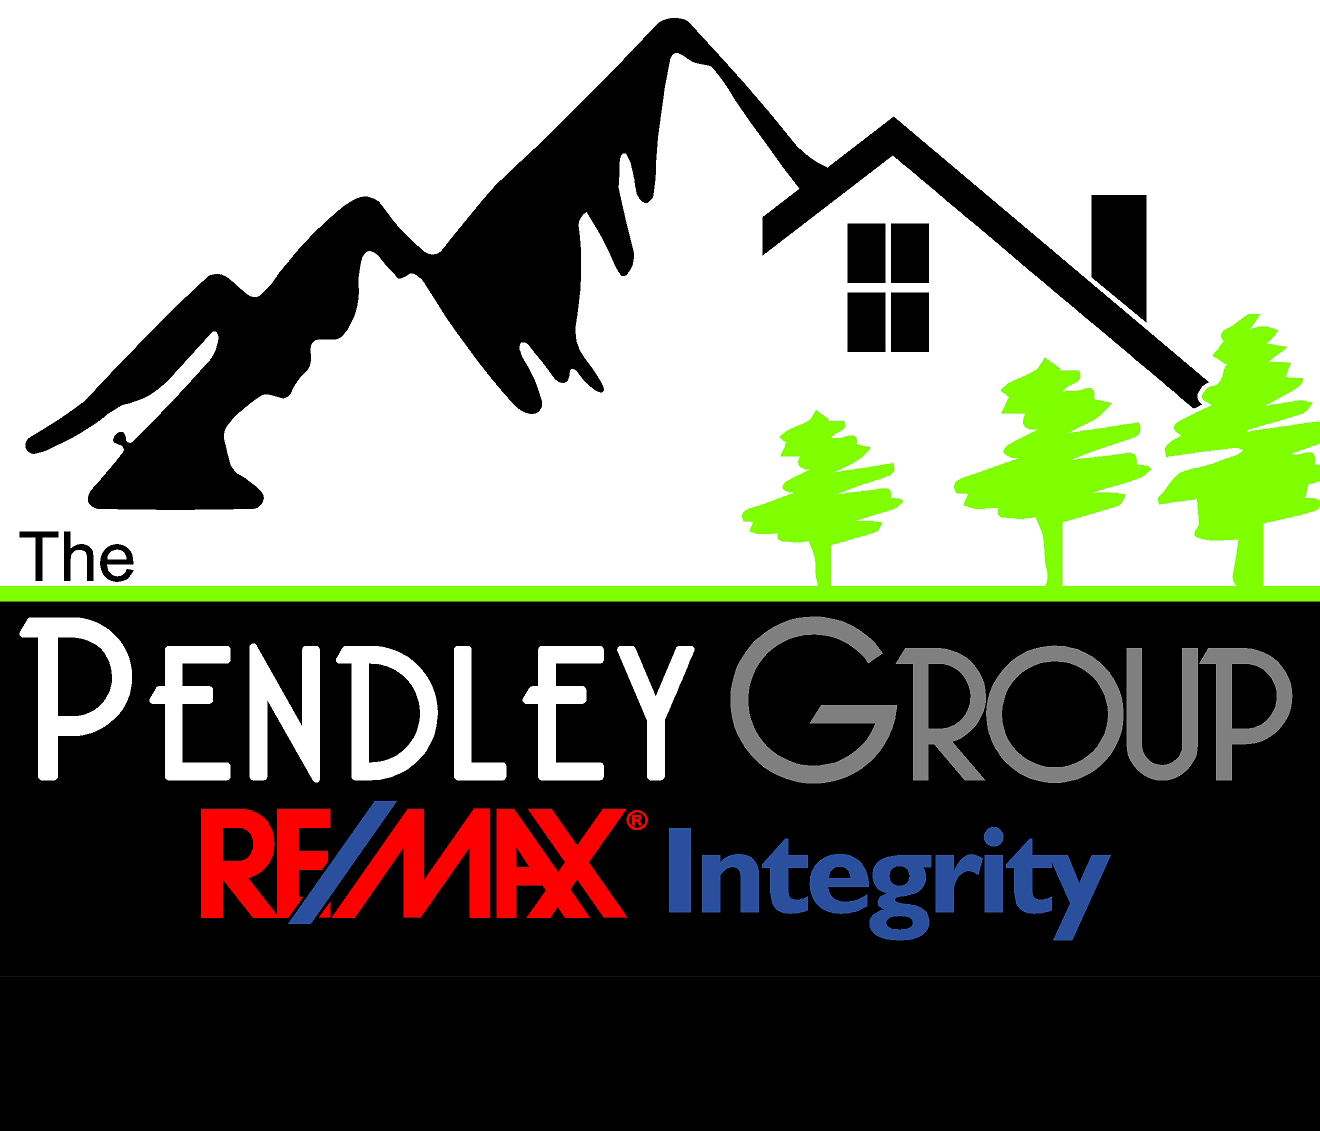 Pendley Group - Remax